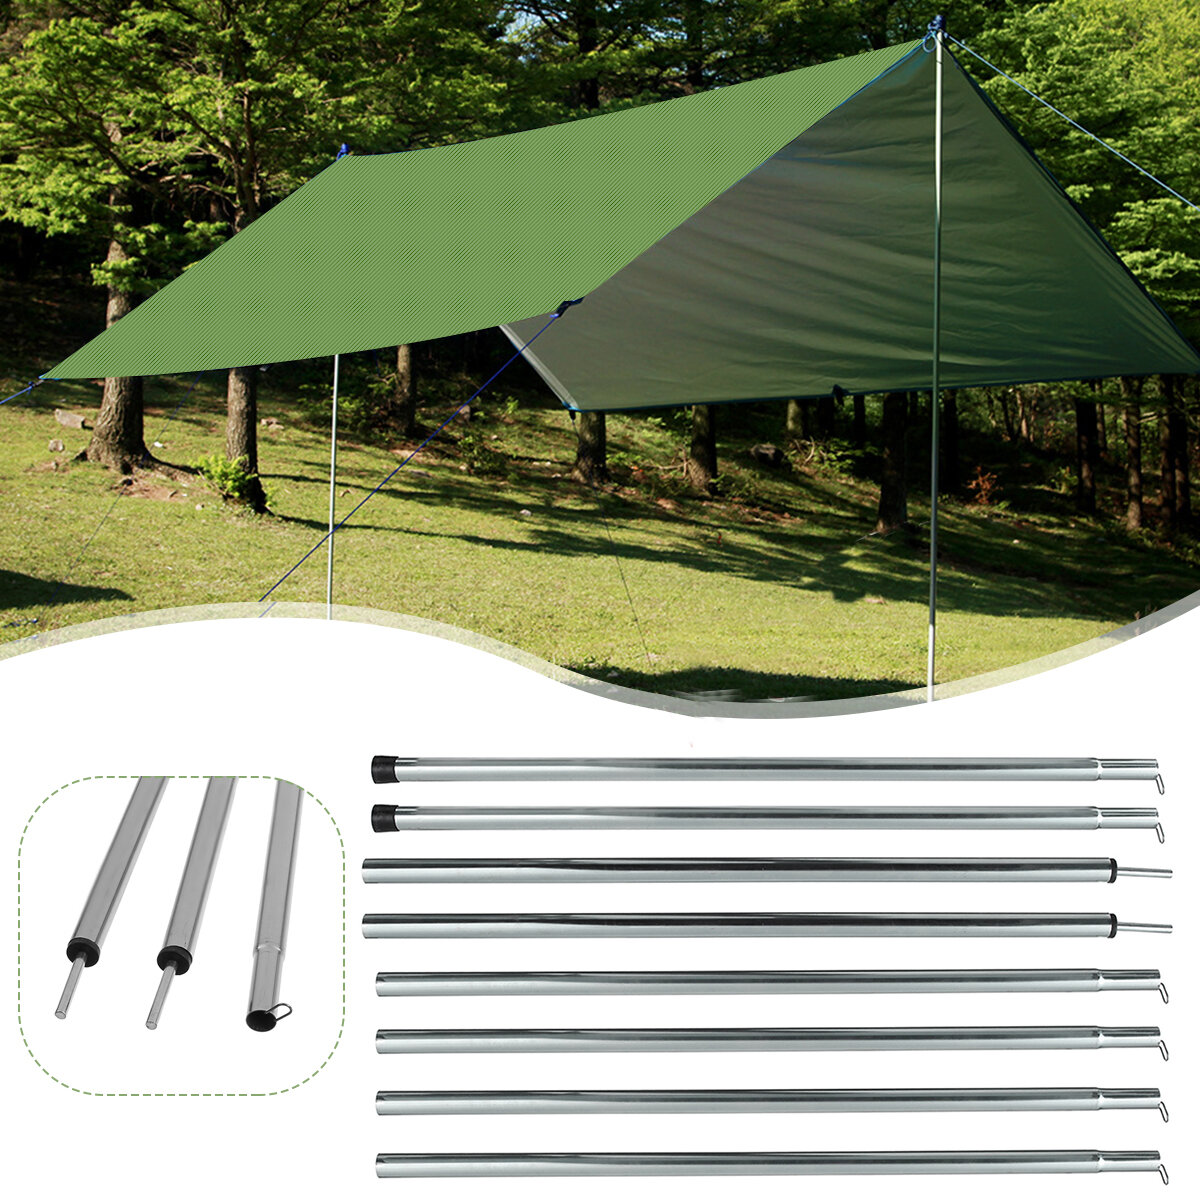 200cm Camping Tent Pole Fiberglass Support Rods Awning Frames Camping Tents Rods Tents Accessories